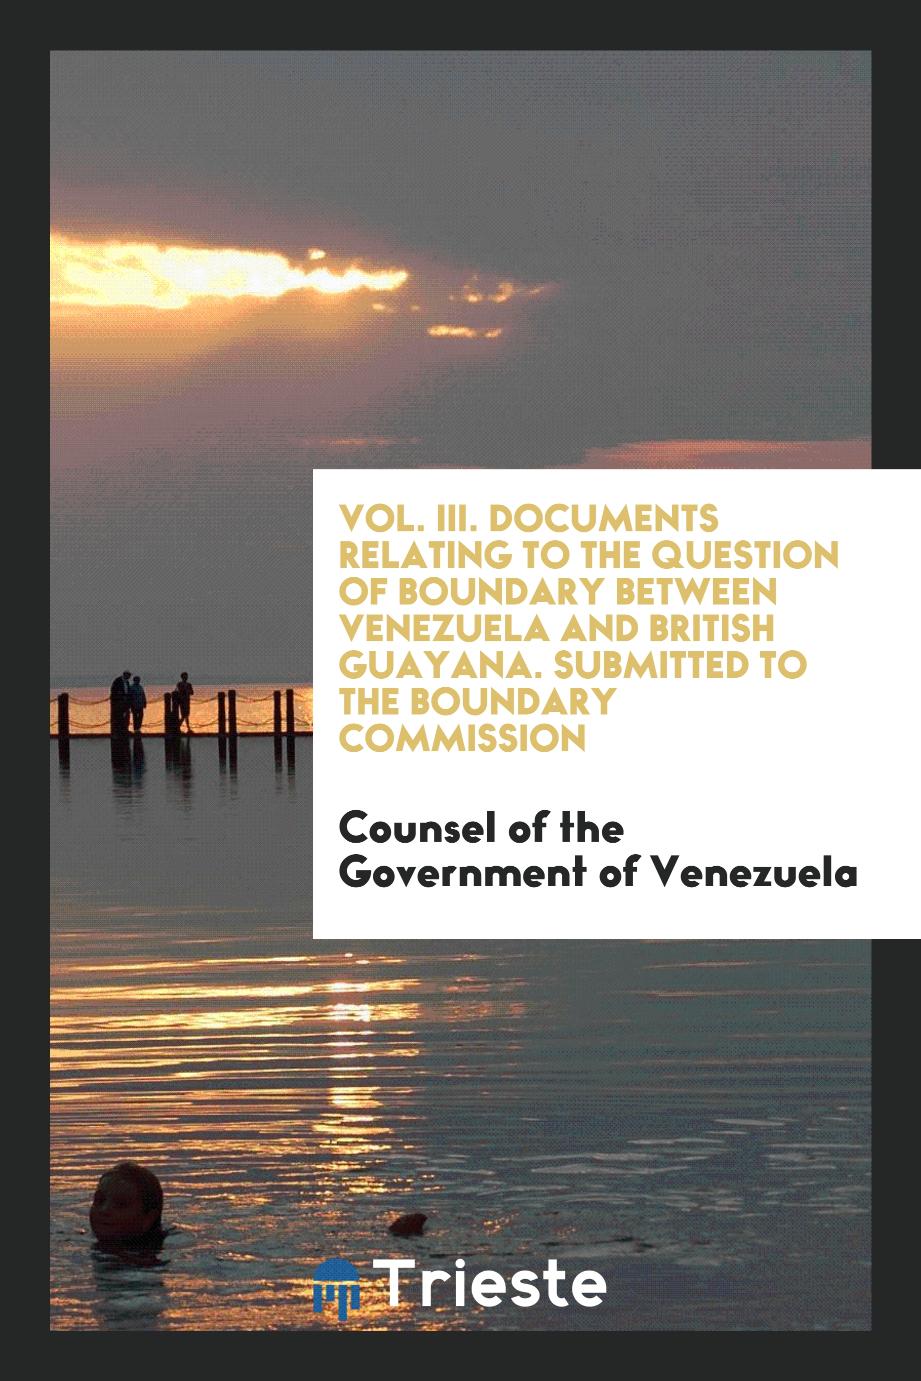 Vol. III. Documents Relating to the Question of Boundary Between Venezuela and British Guayana. Submitted to the Boundary Commission